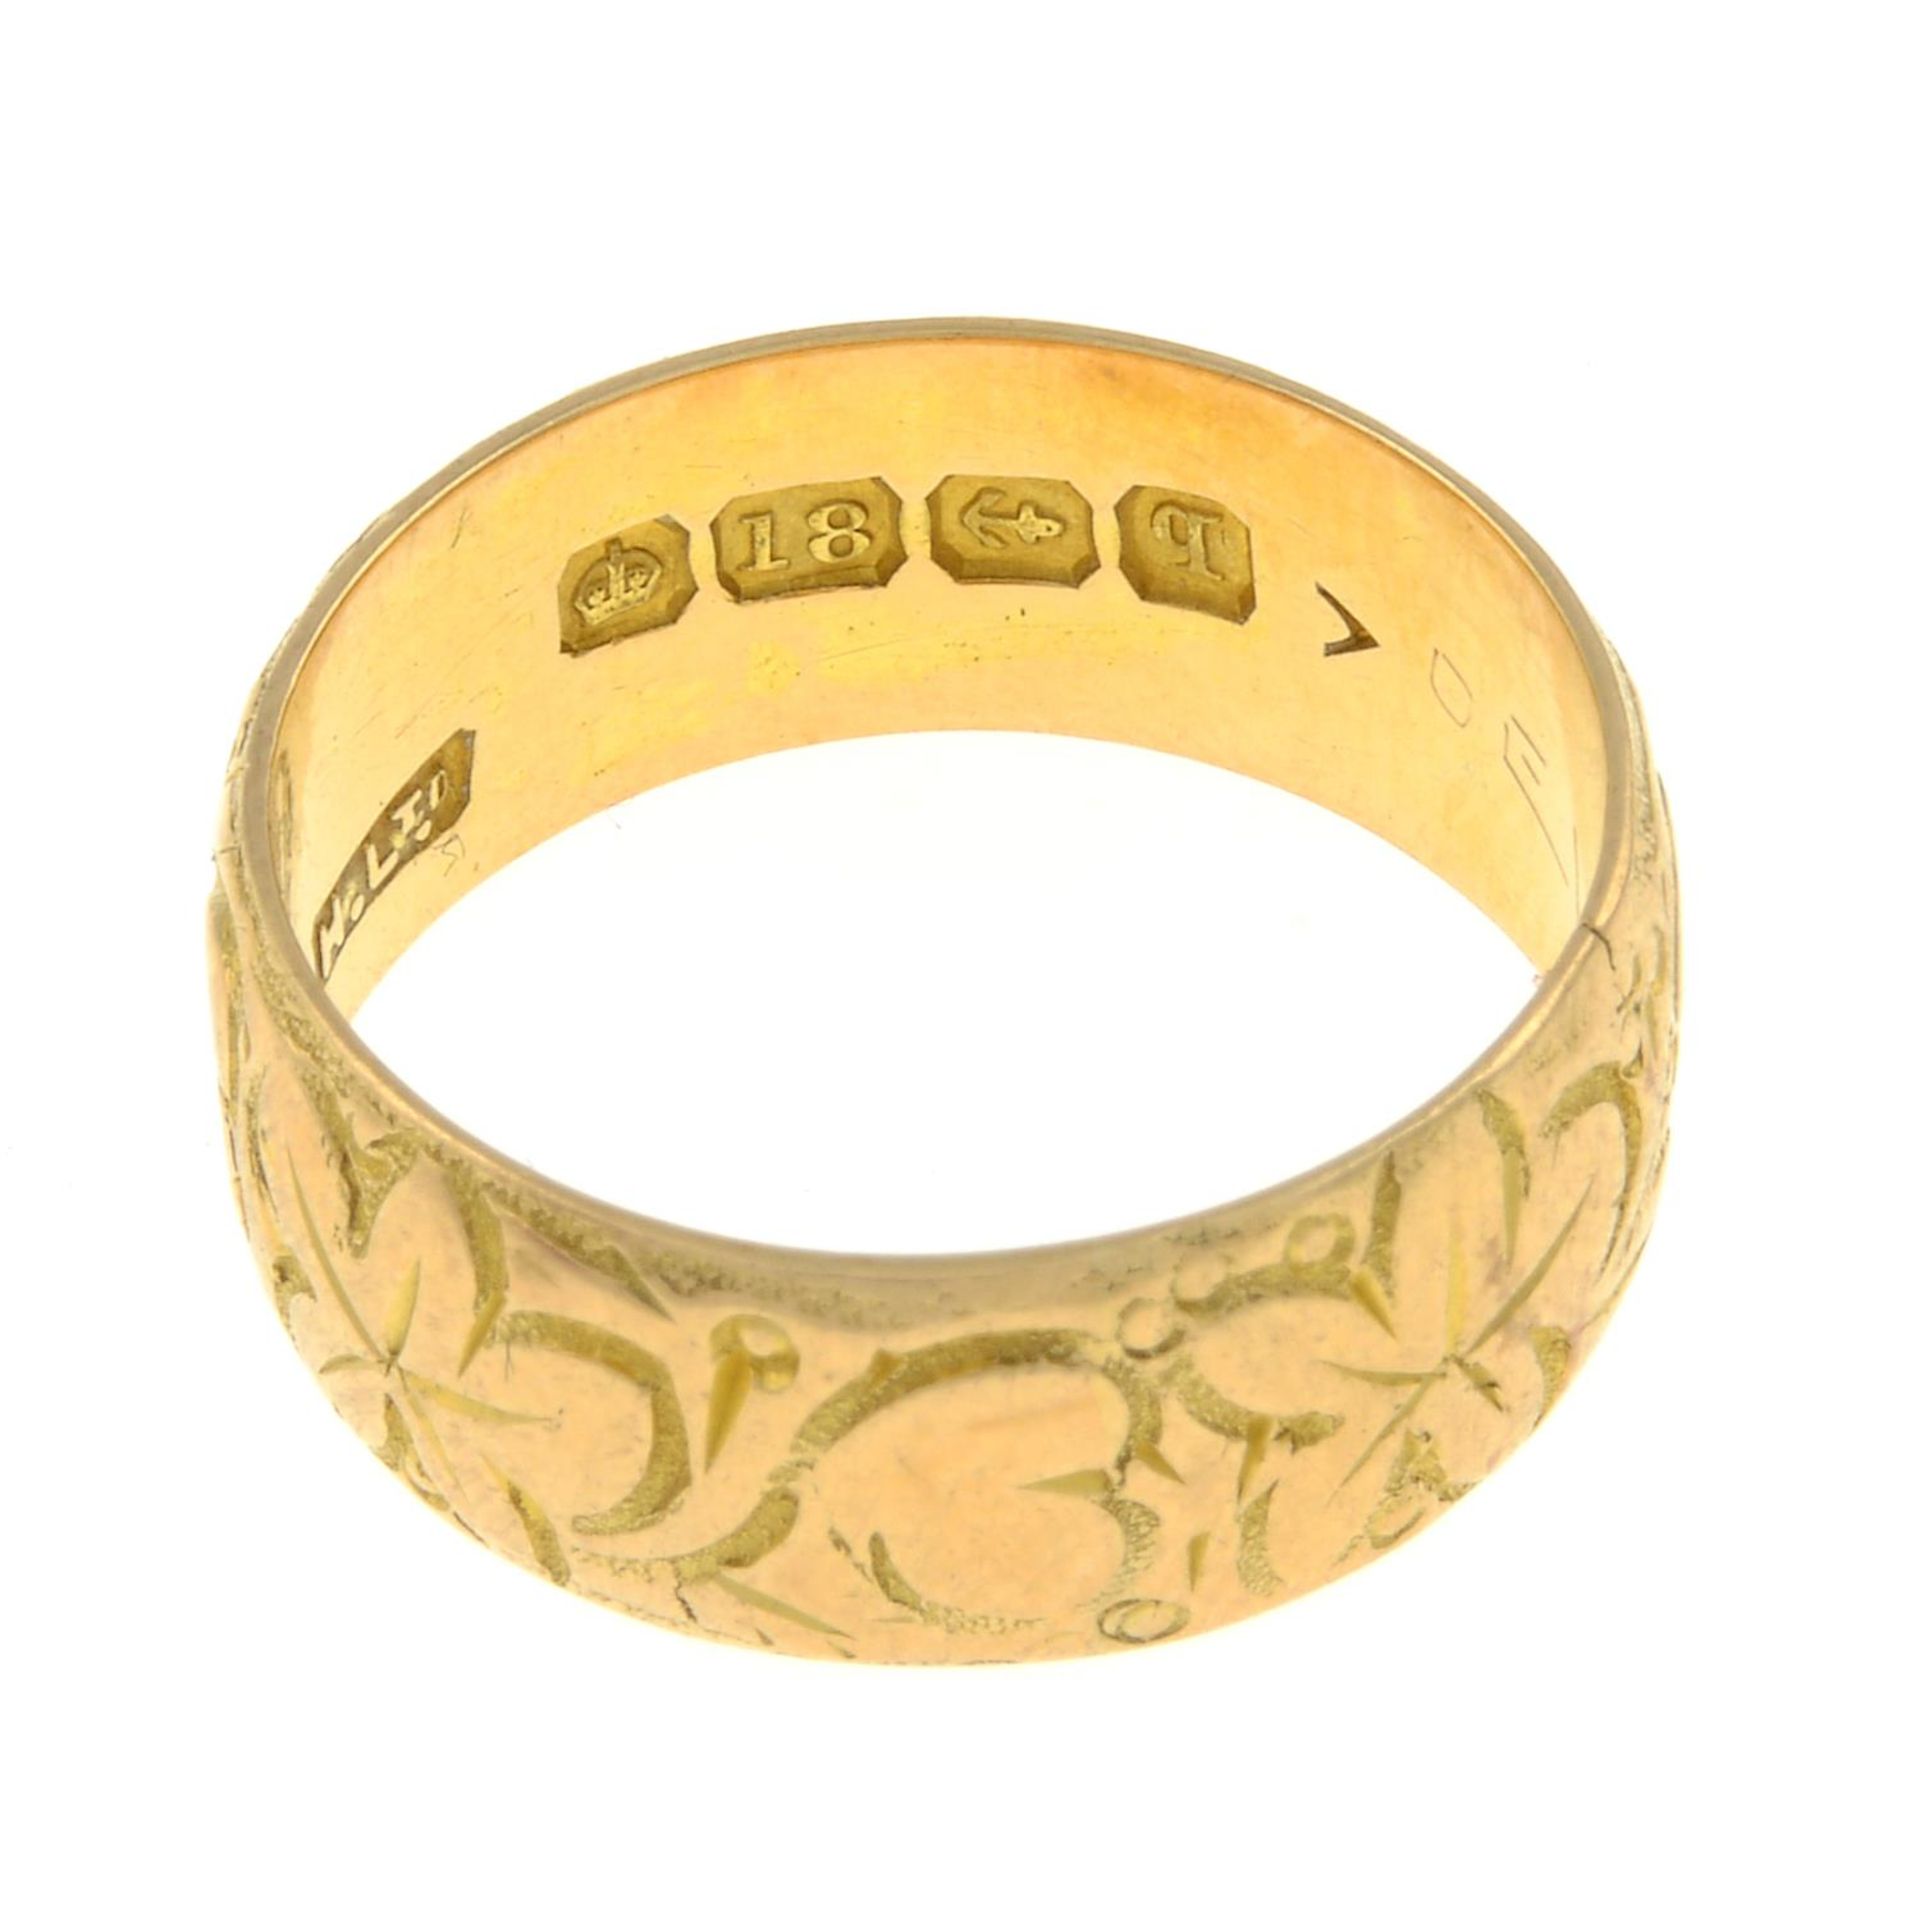 An early 20th century 18ct gold engraved band ring.Hallmarks for Birmingham, 1915. - Image 2 of 2